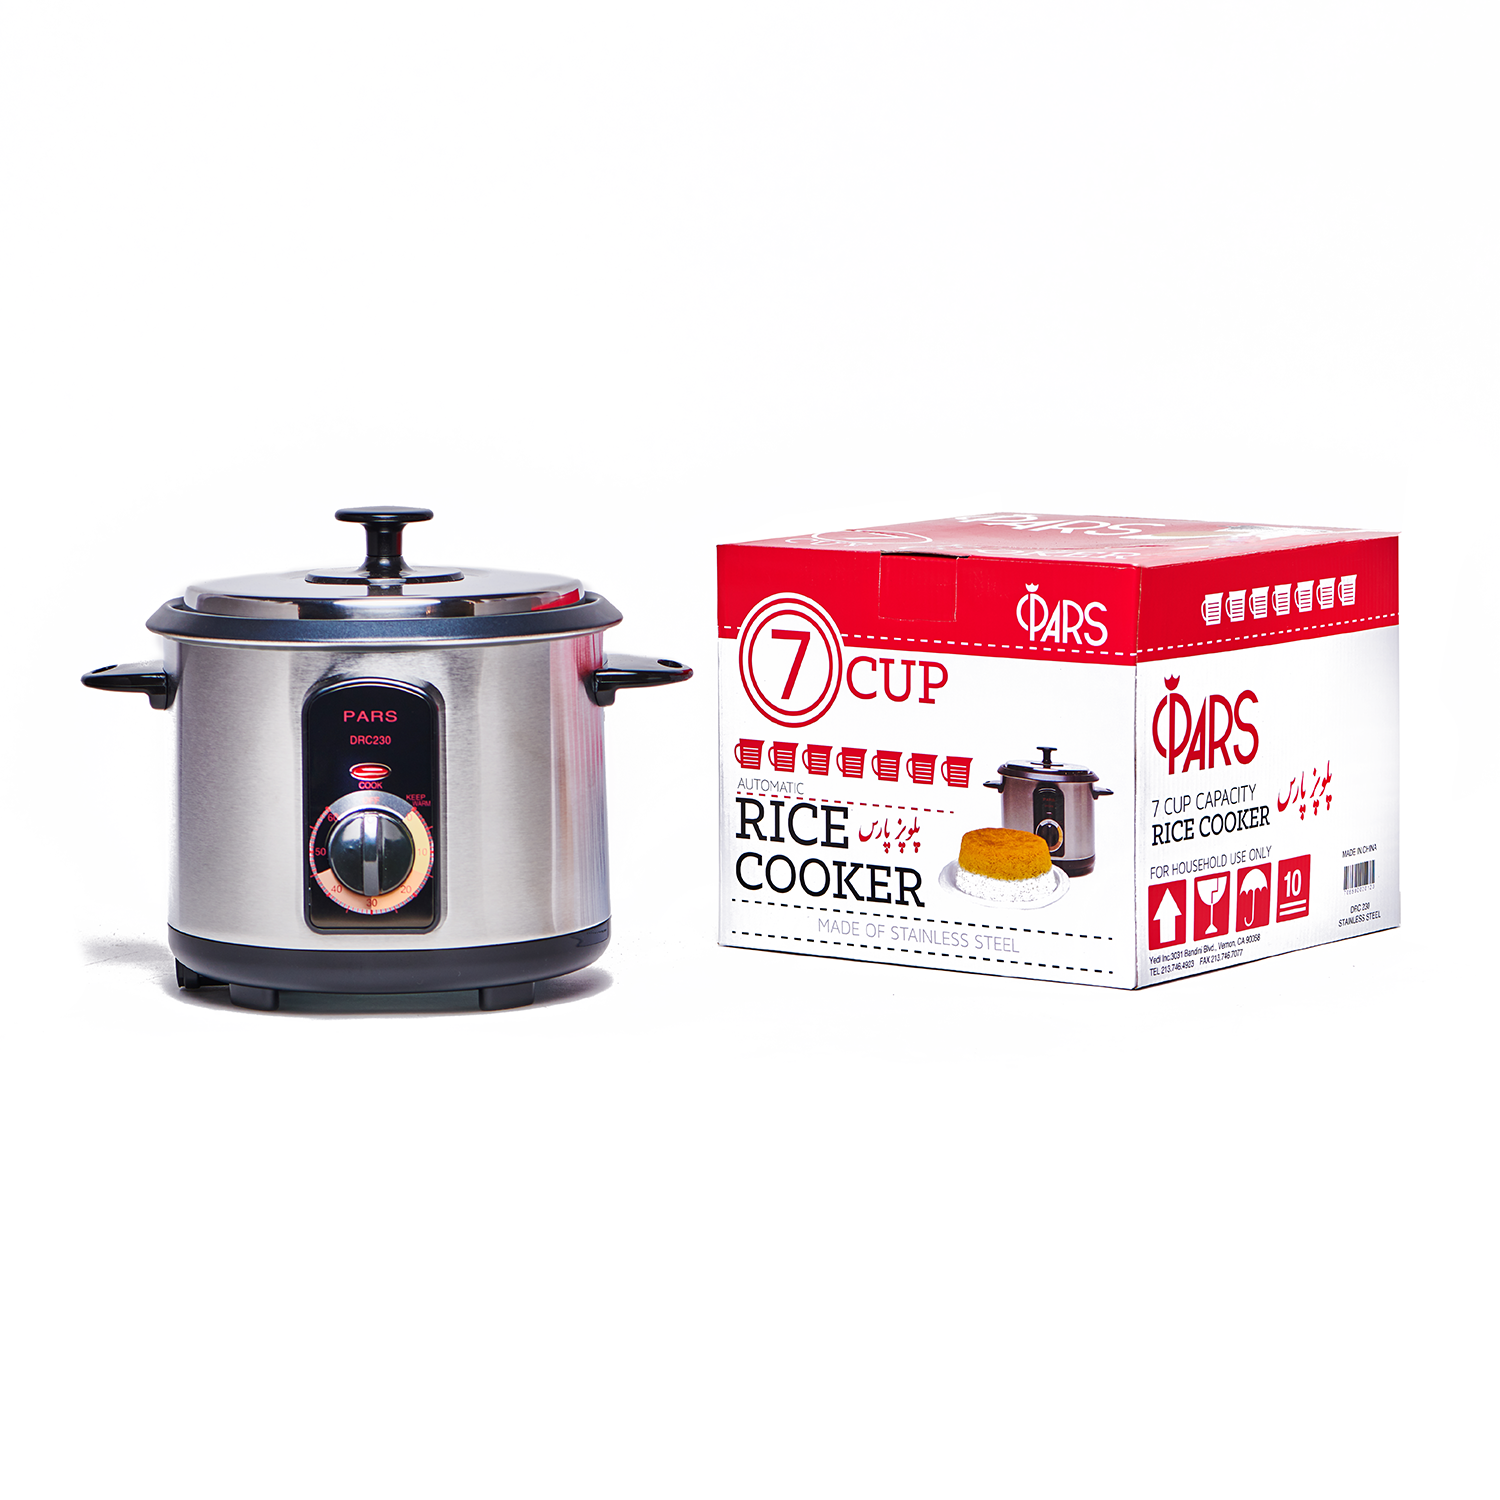 Pars 7 Cup Rice Cooker - Polopaz - پلوپز